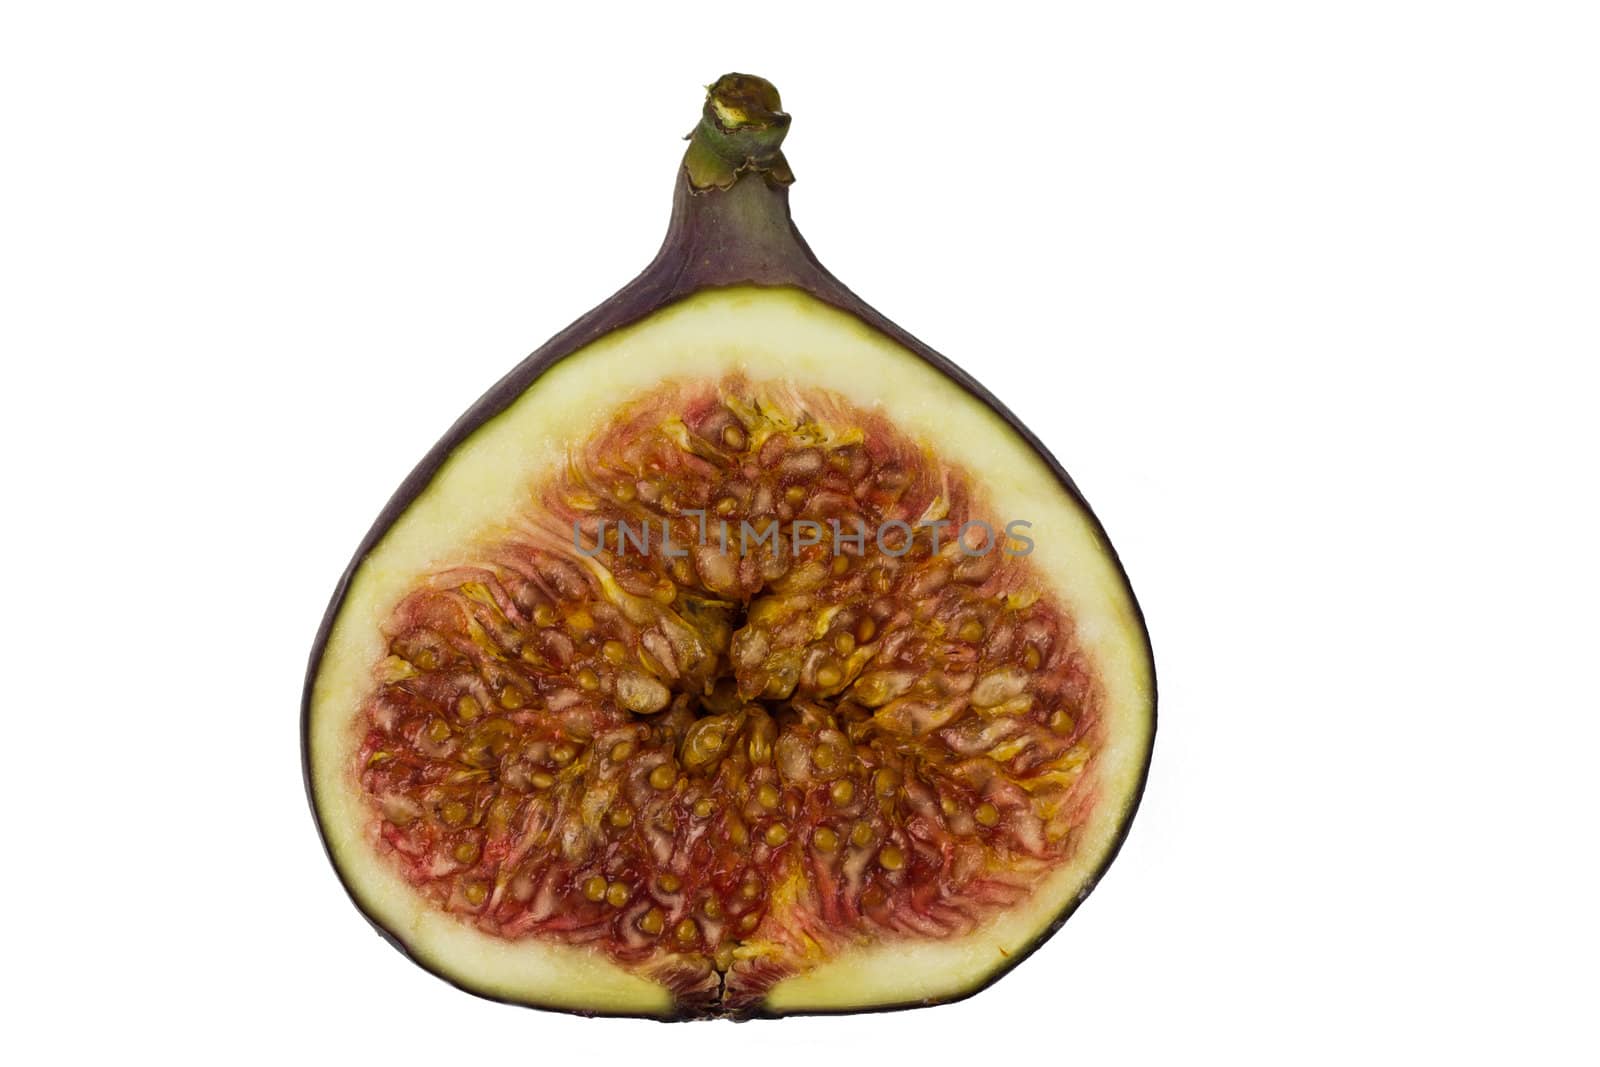 A  close up of a single juicy ripe fresh fig